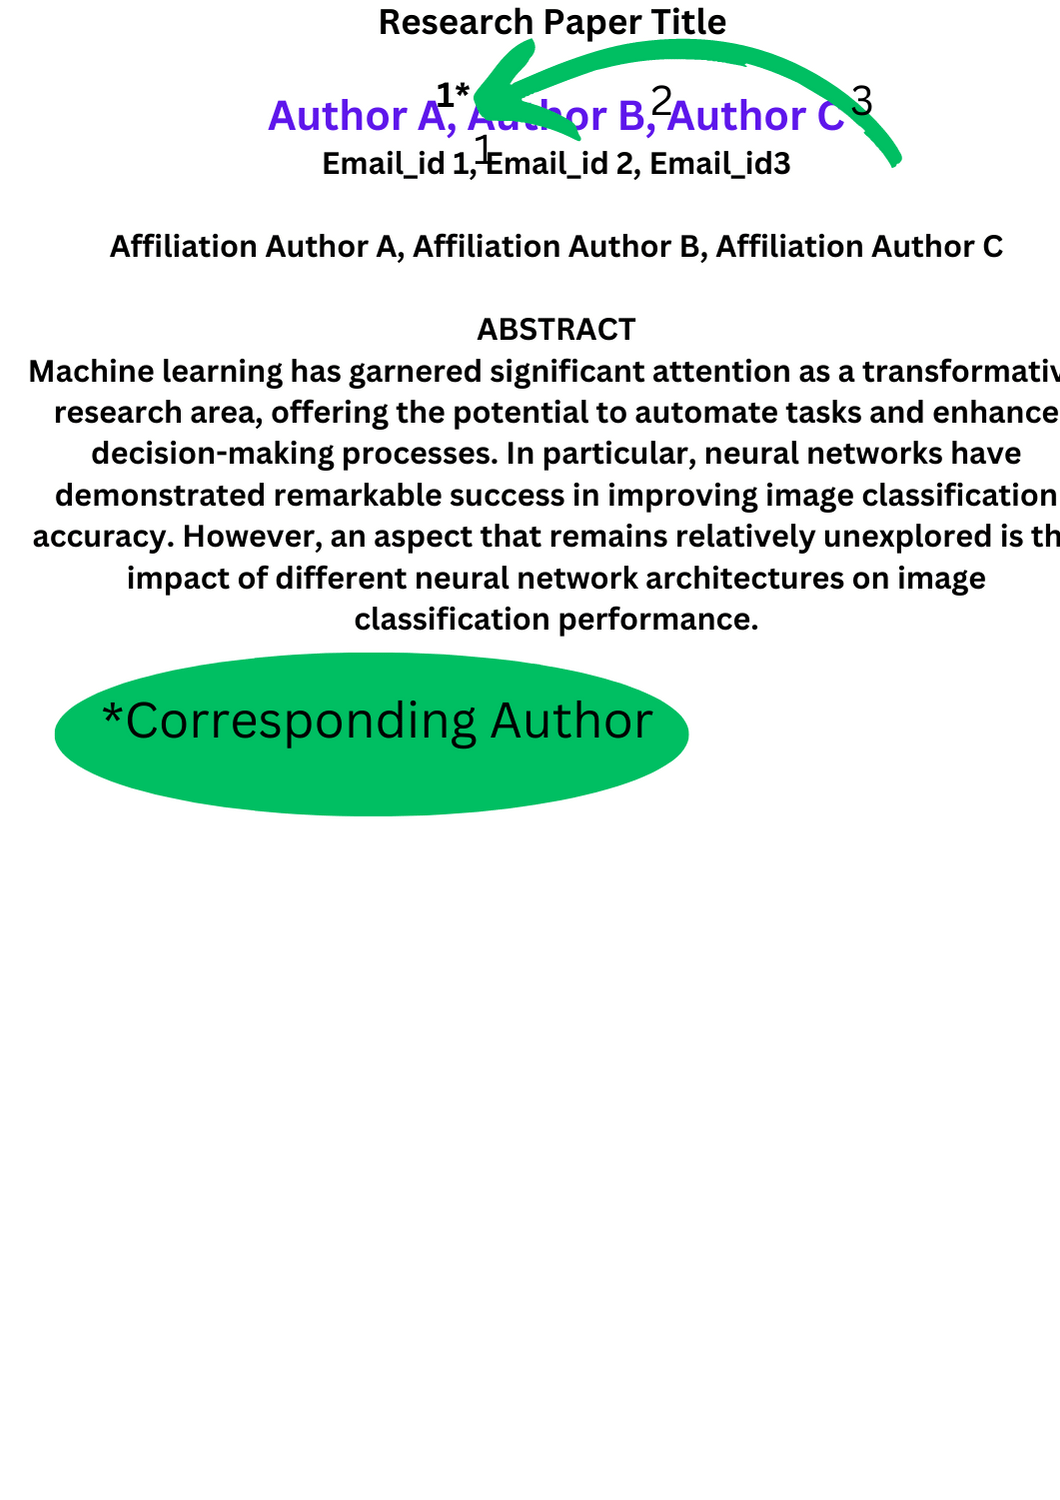 corresponding author in research paper meaning